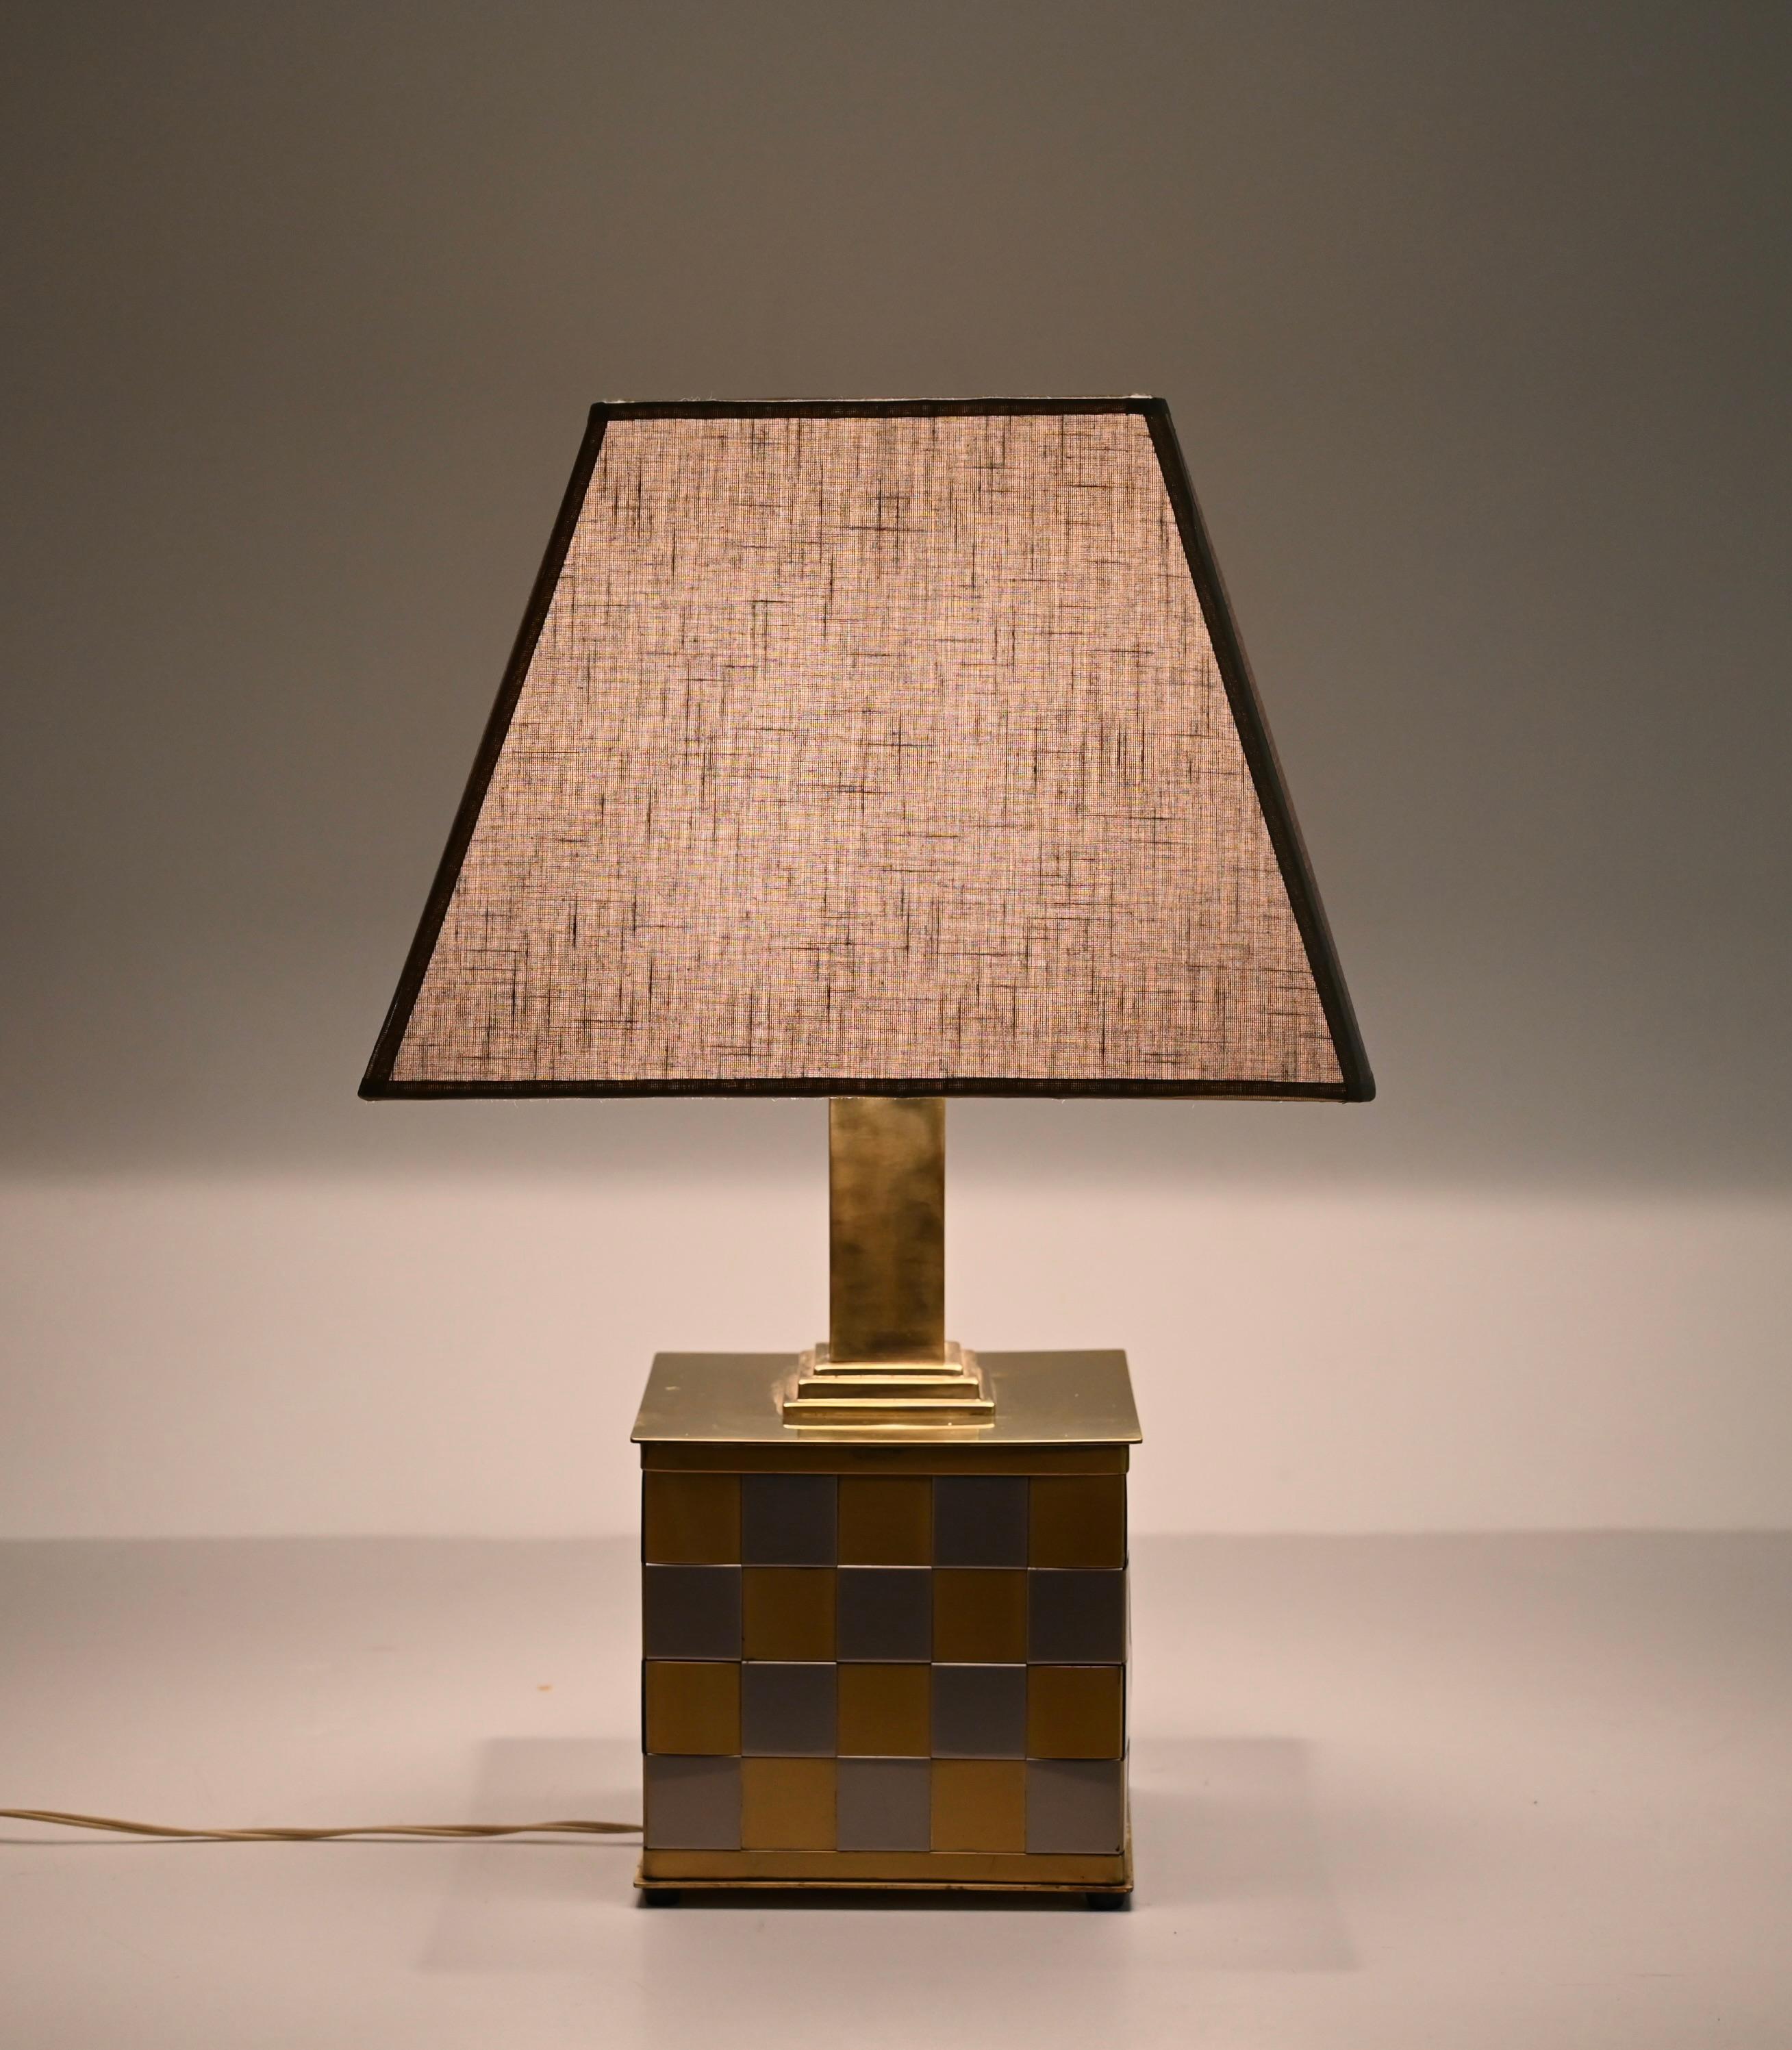 Midcentury Brass and Chrome Table Lamp, Willy Rizzo, Italy 1970s For Sale 9